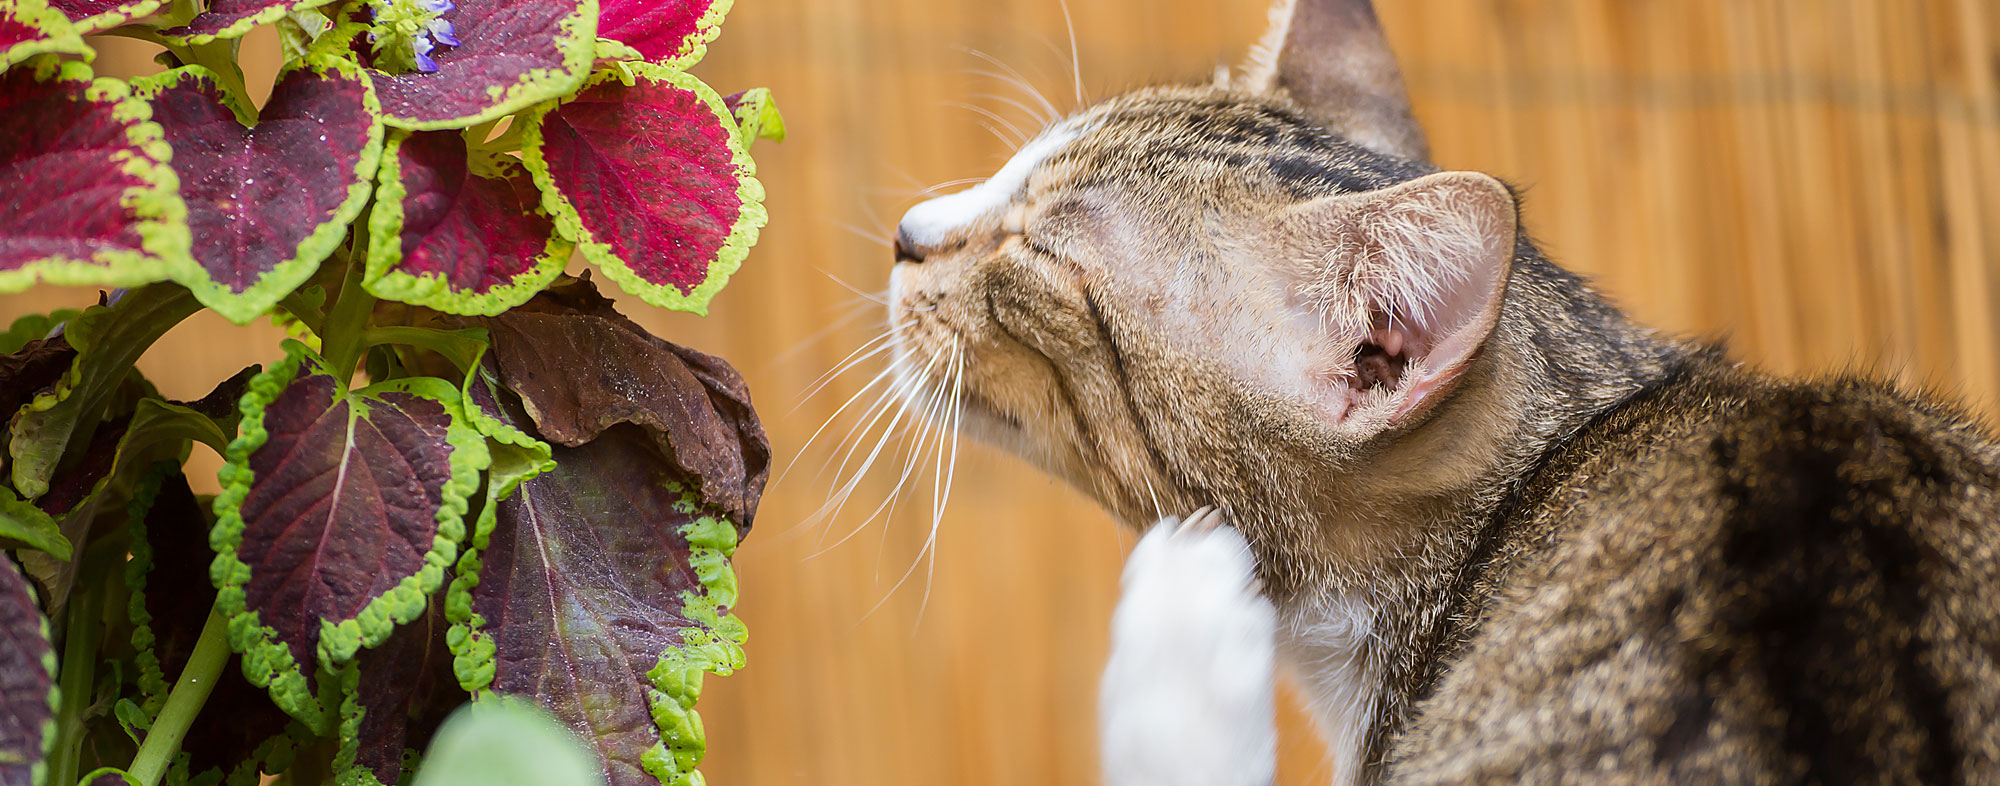 Parasites in cats may cause symptoms like fever and anemia